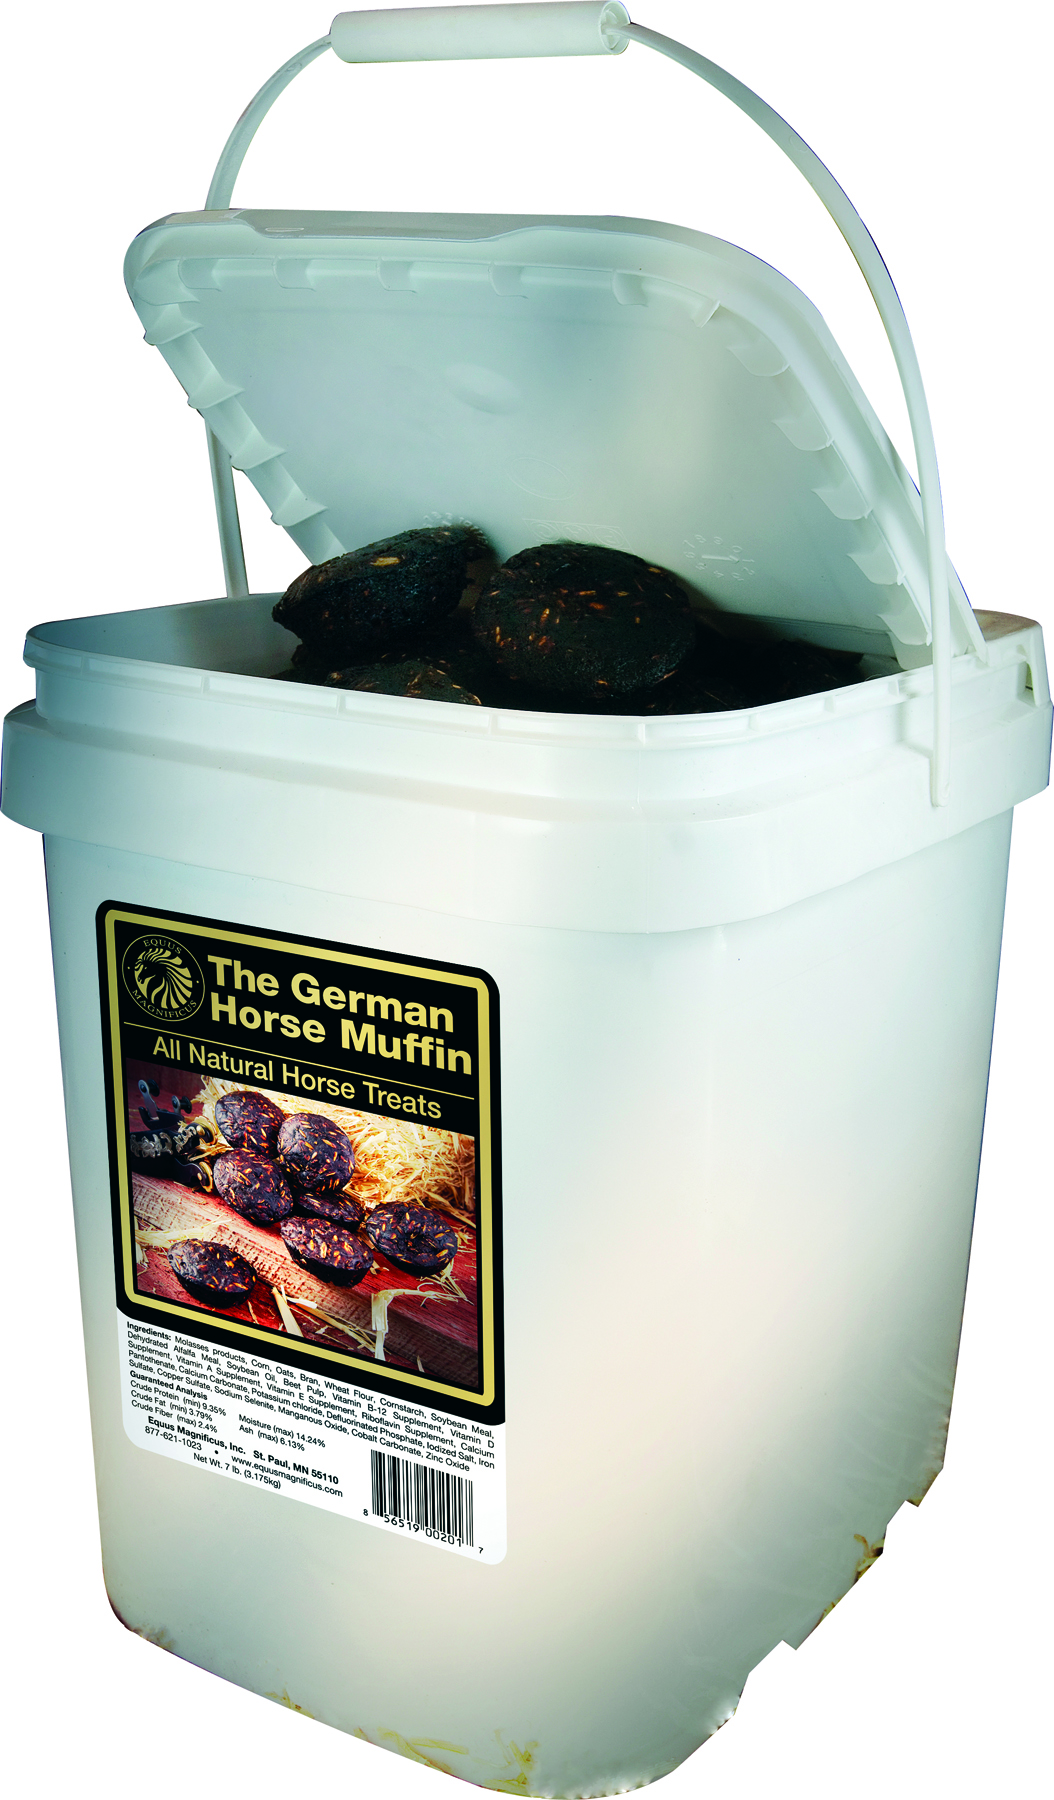 THE GERMAN HORSE MUFFIN ALL NATURAL HORSE TREATS